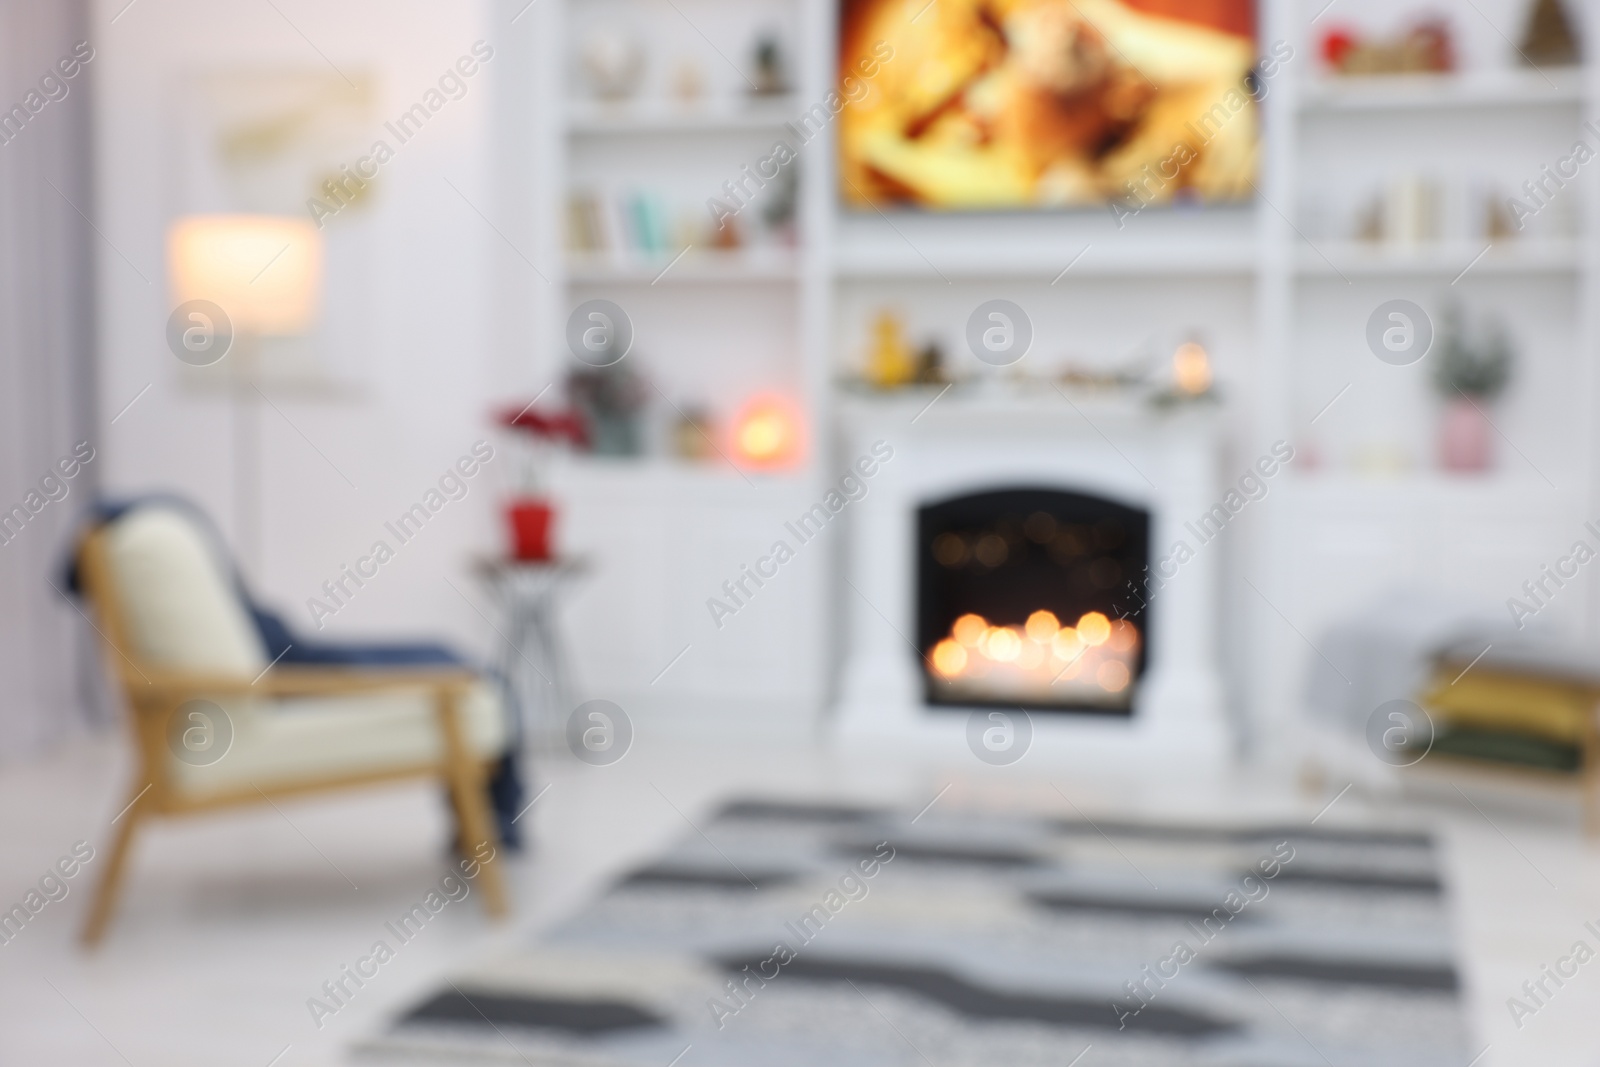 Photo of Blurred view of beautiful living room with Christmas decor, fireplace and armchair. Interior design